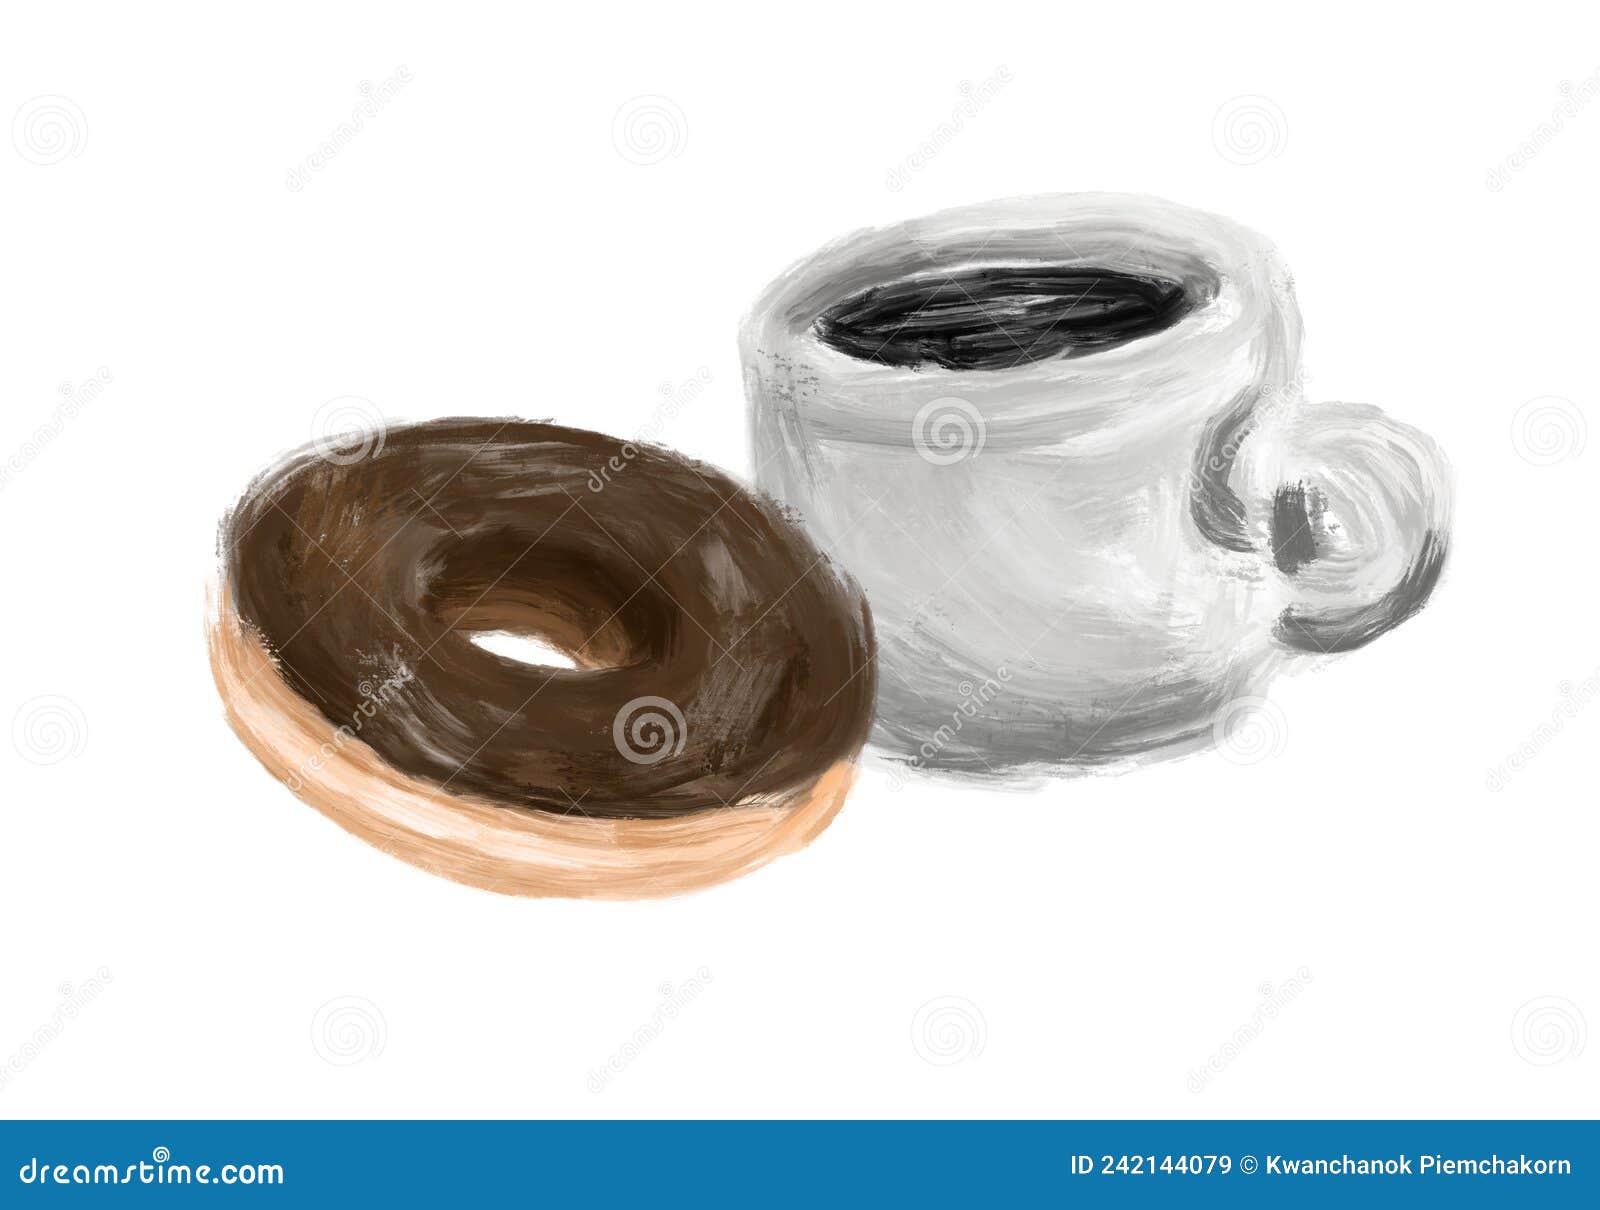 https://thumbs.dreamstime.com/z/set-american-traditional-food-includes-coffee-chocolate-doughnut-oil-brush-stroke-style-set-american-traditional-food-242144079.jpg